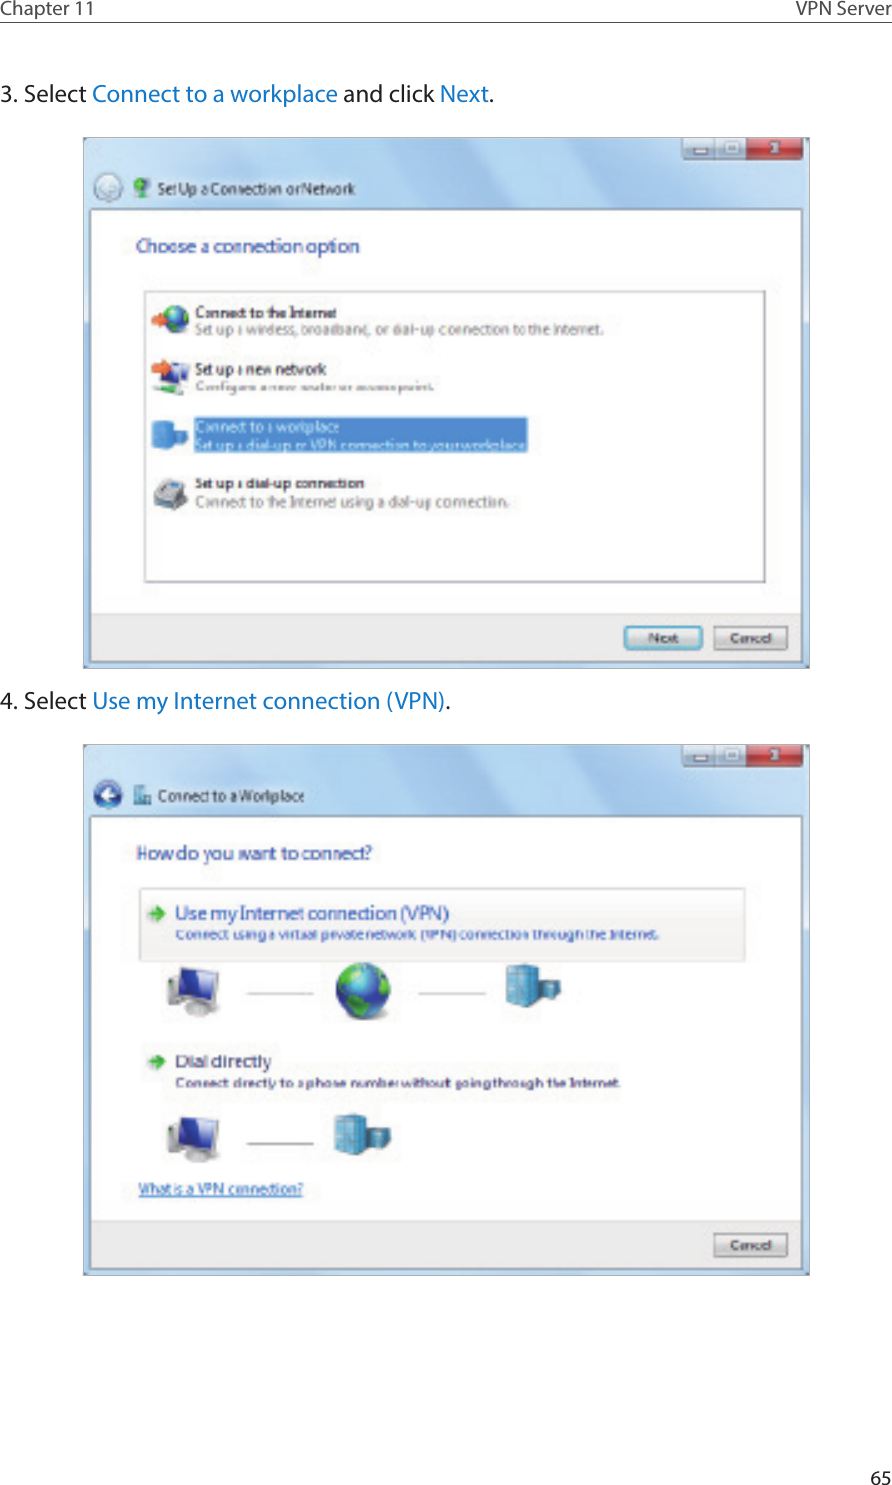 65Chapter 11 VPN Server3. Select Connect to a workplace and click Next.4. Select Use my Internet connection (VPN).